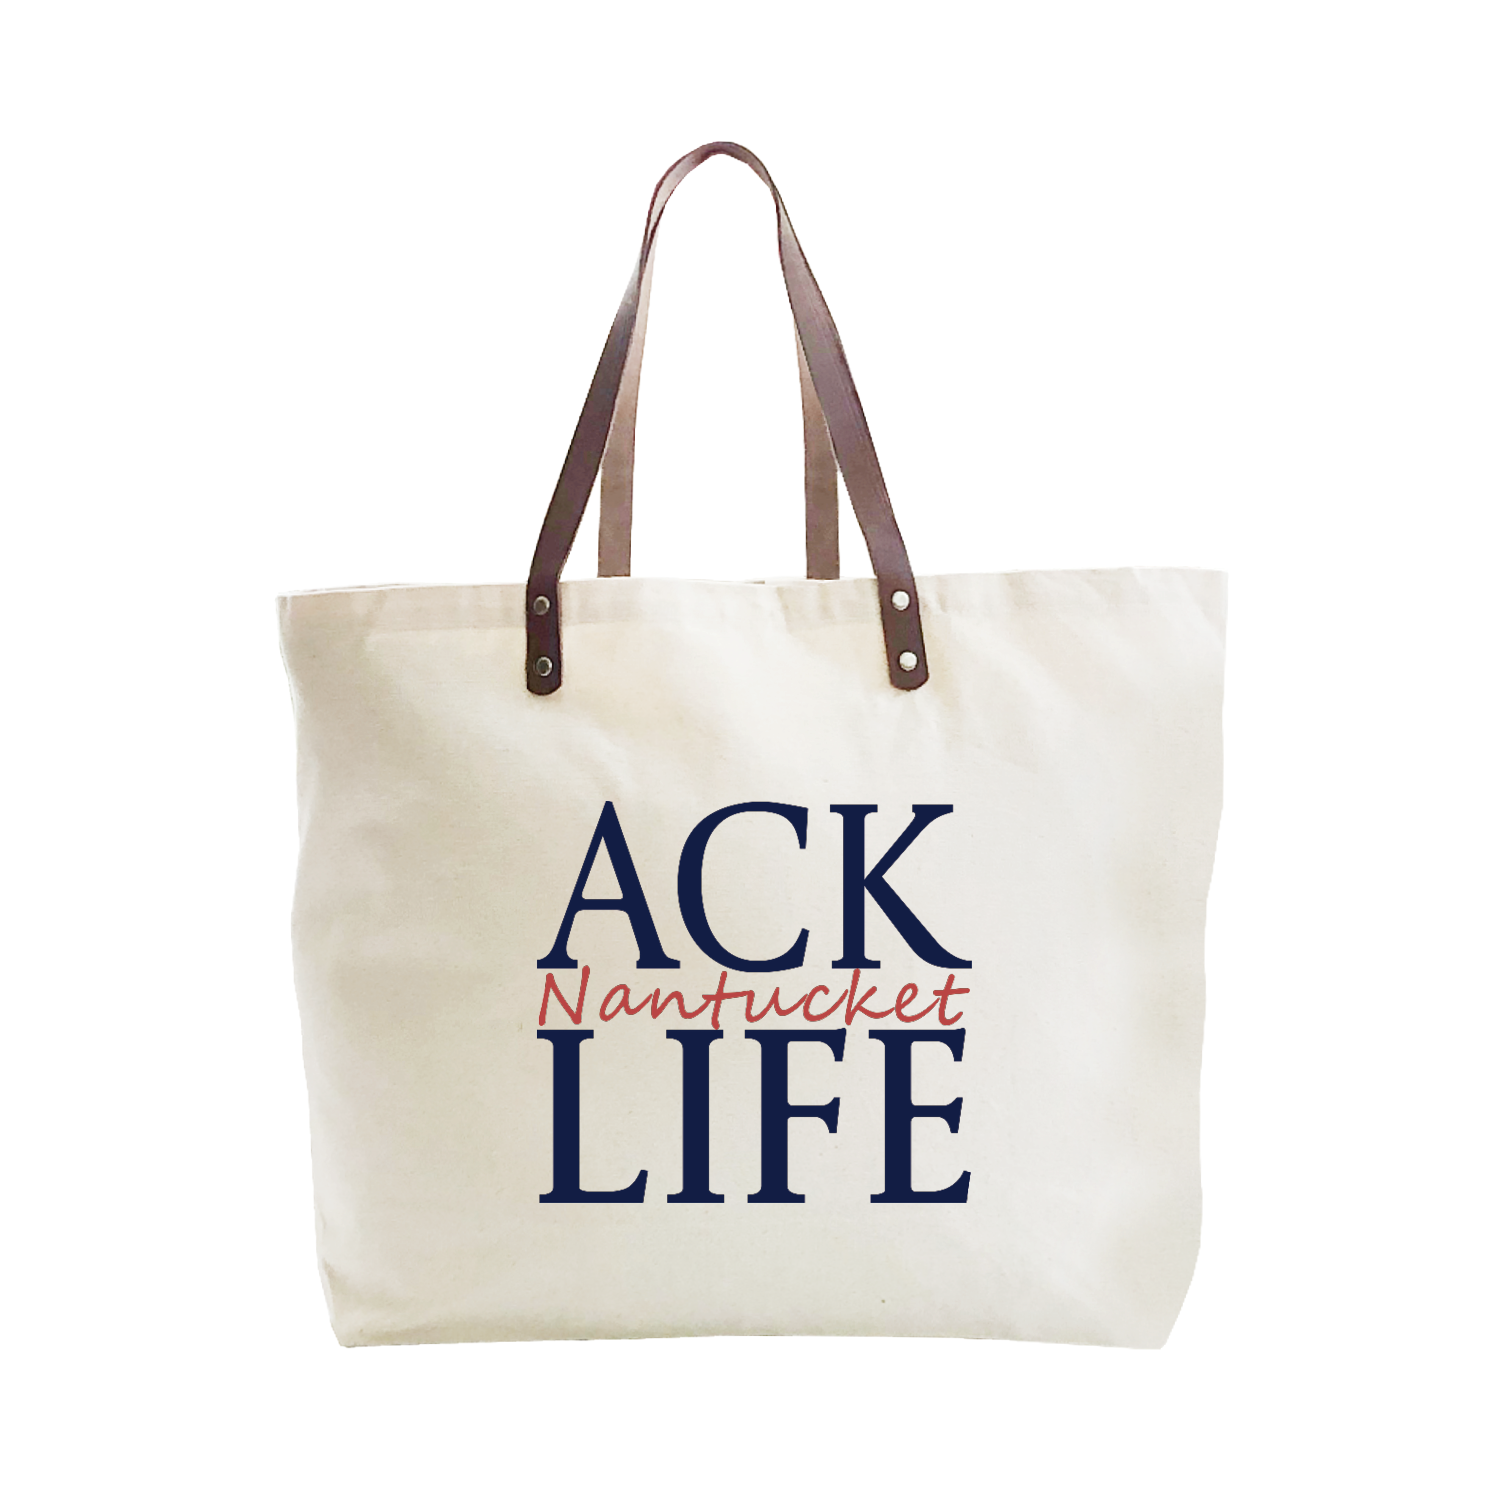 ACK Life Nantucket in nantucket red large tote